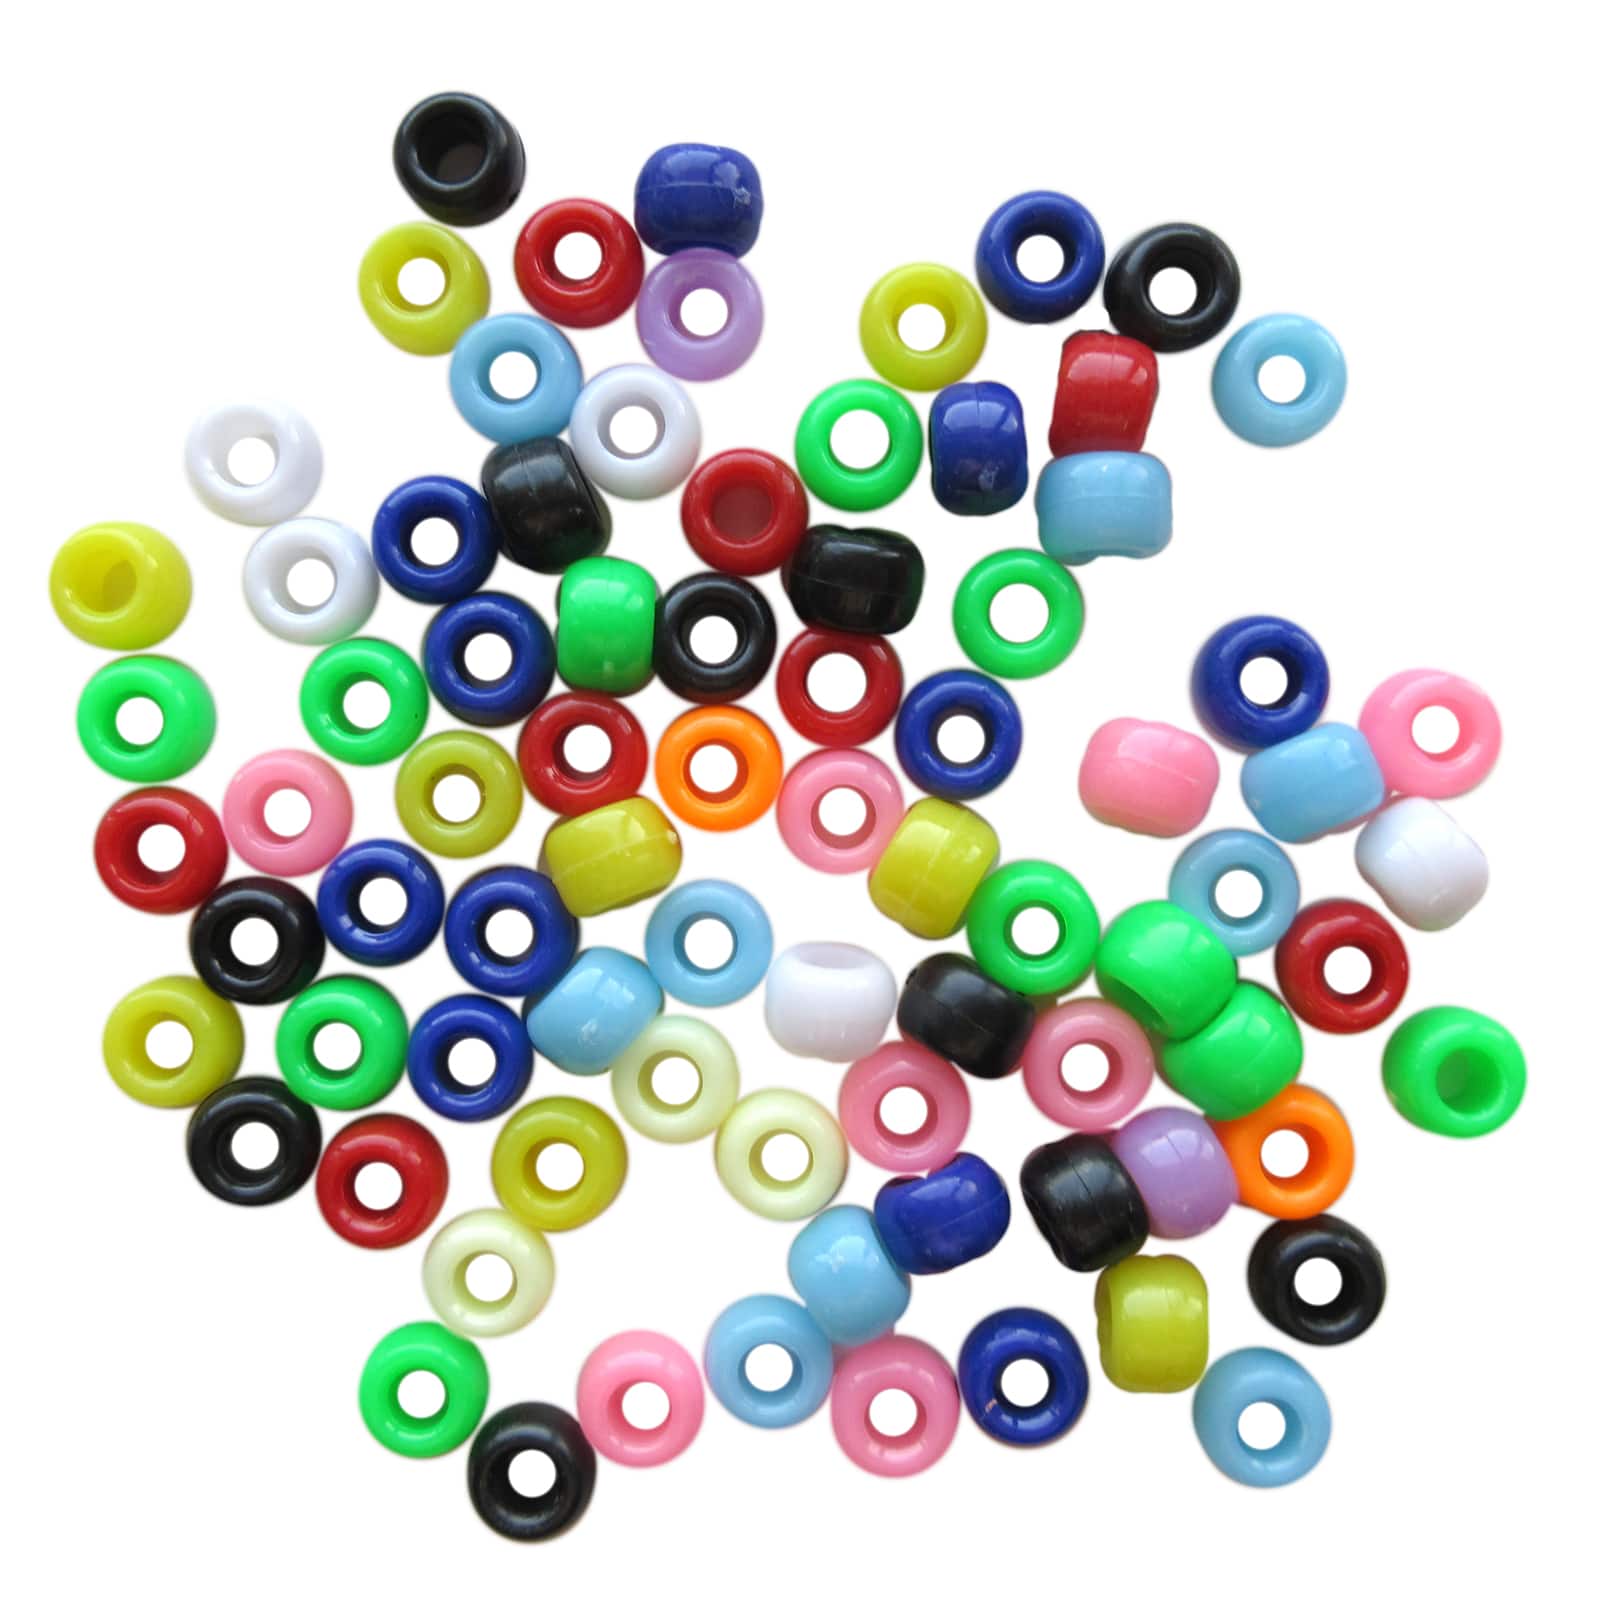 12 Packs: 280 ct. (3,360 total) Glow in the Dark Pony Beads by Creatology™,  6mm x 9mm 